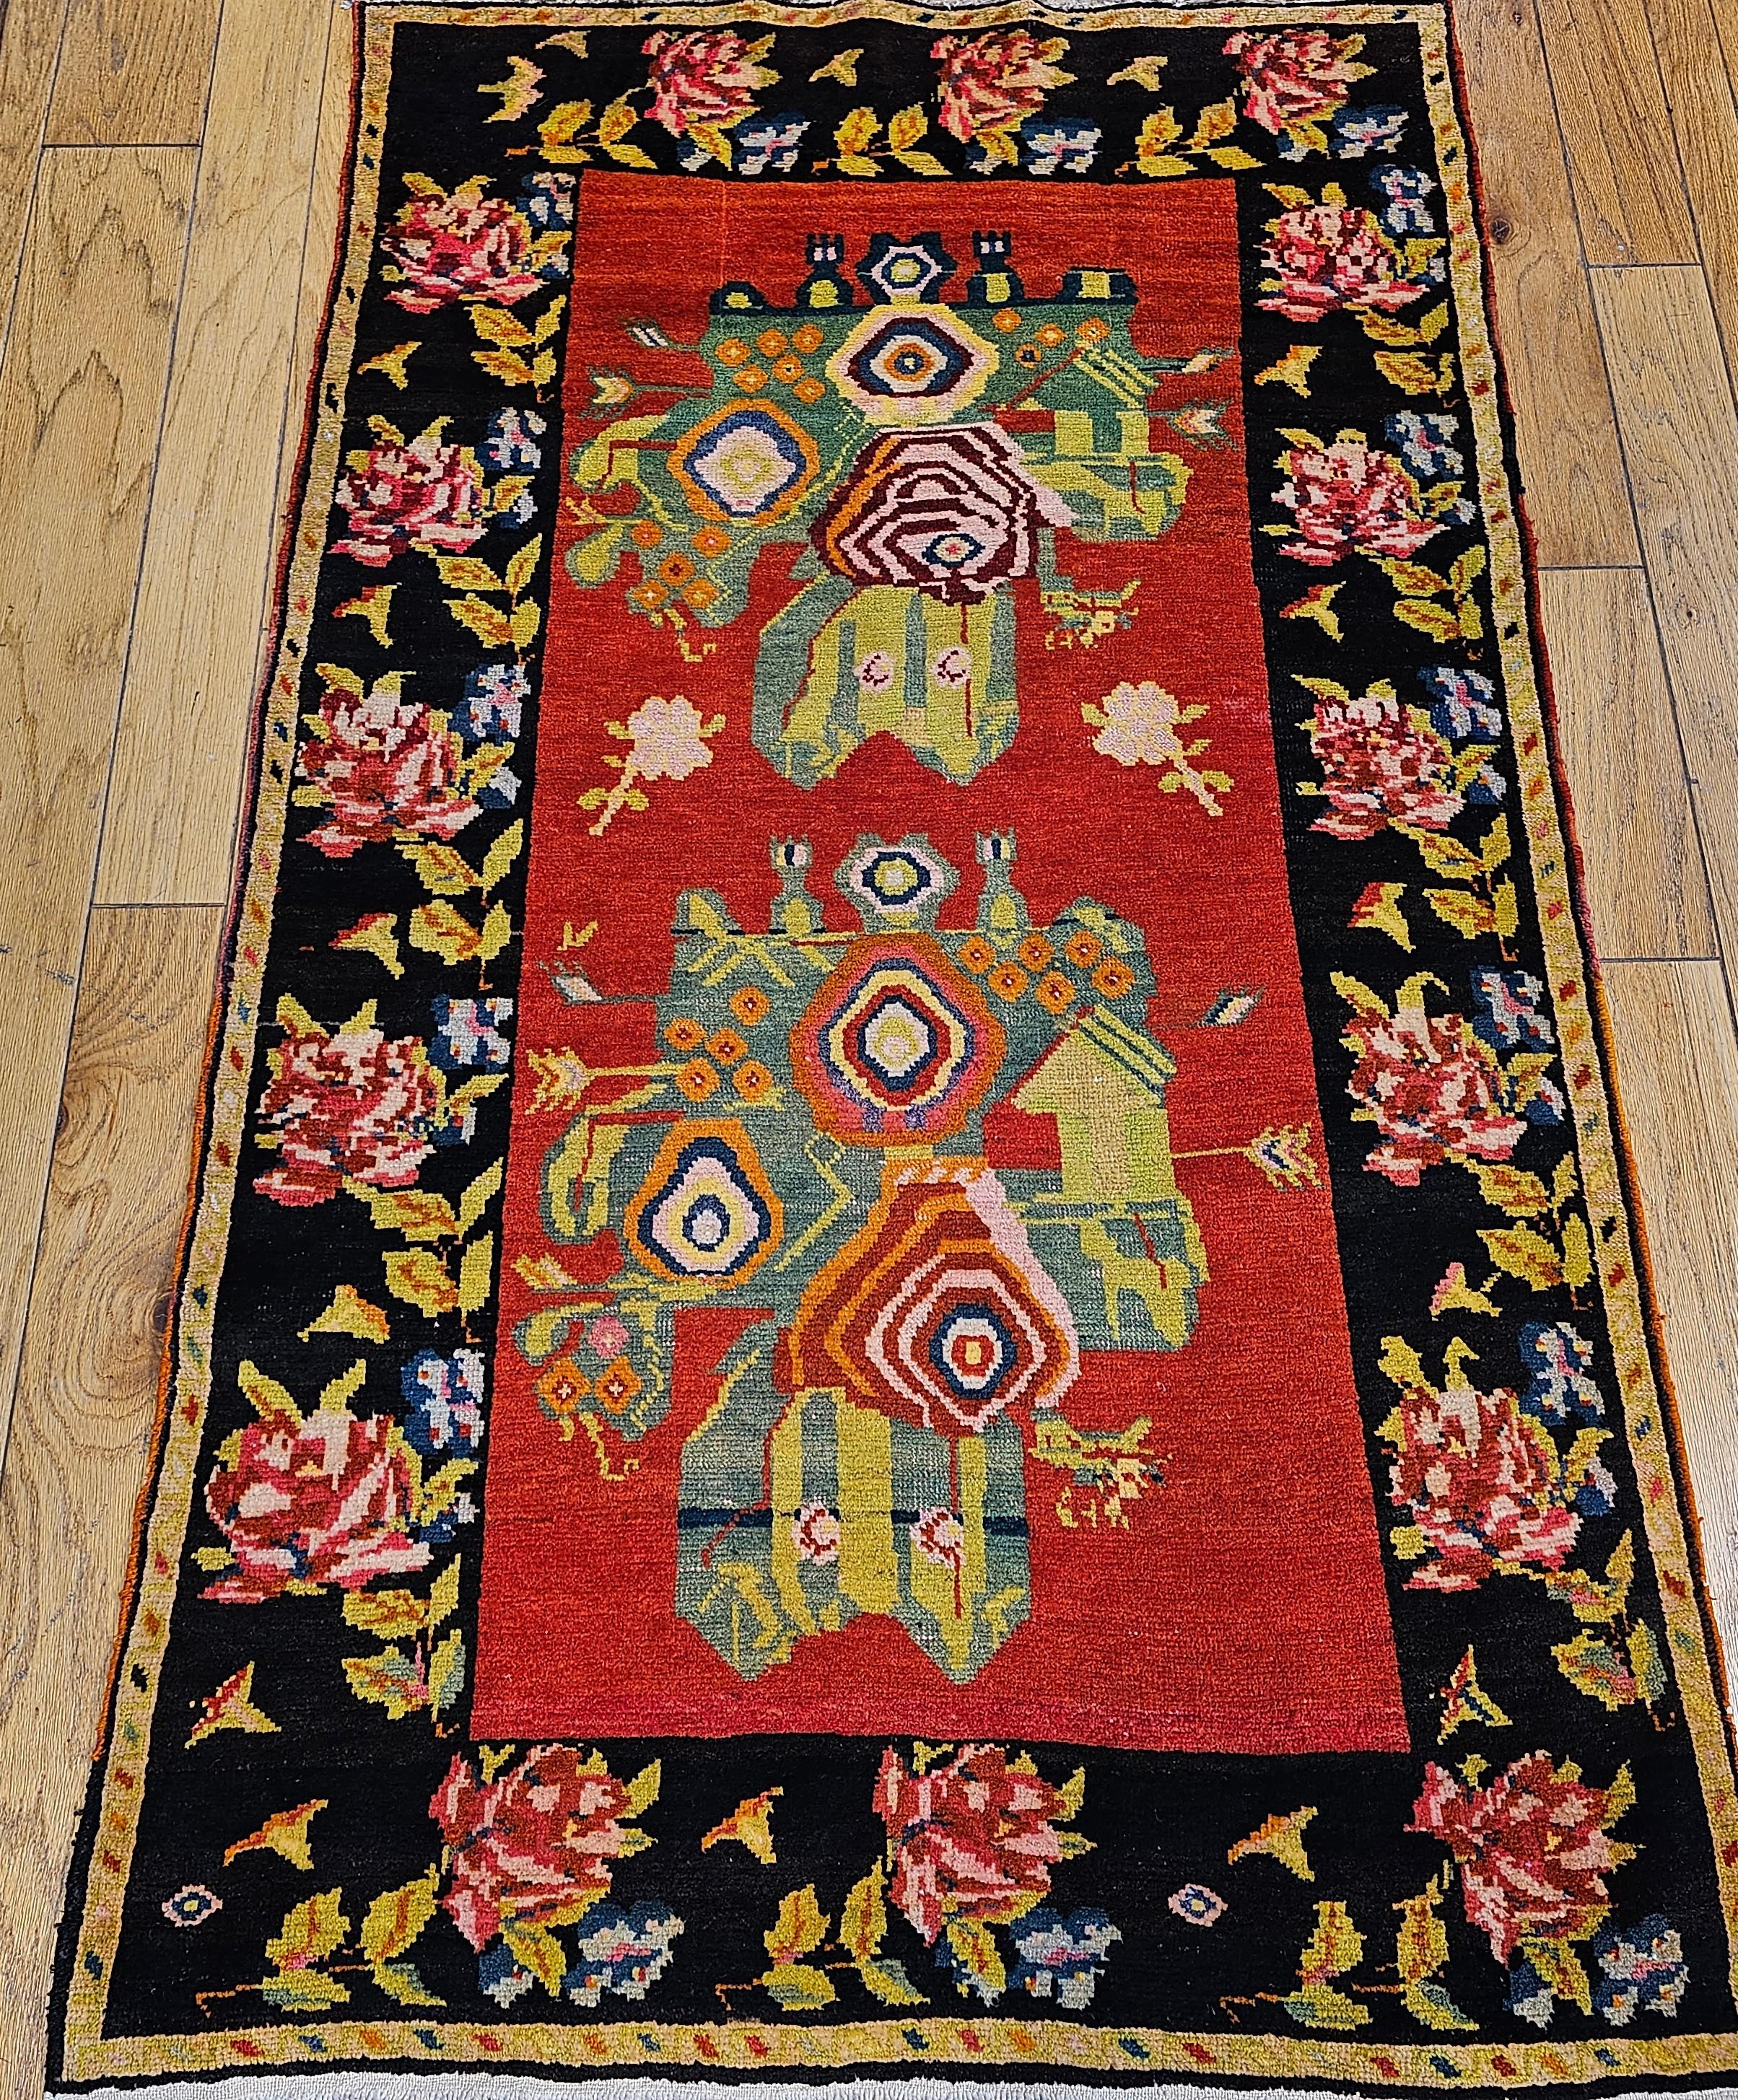 Vintage Karabagh area rug from the Armenian village weavers of the Caucasus mountains comes in a beautiful floral pattern in red, pin, green, yellow and blue .  The use of the brilliant red color in the field and the “impression” of a flower vase